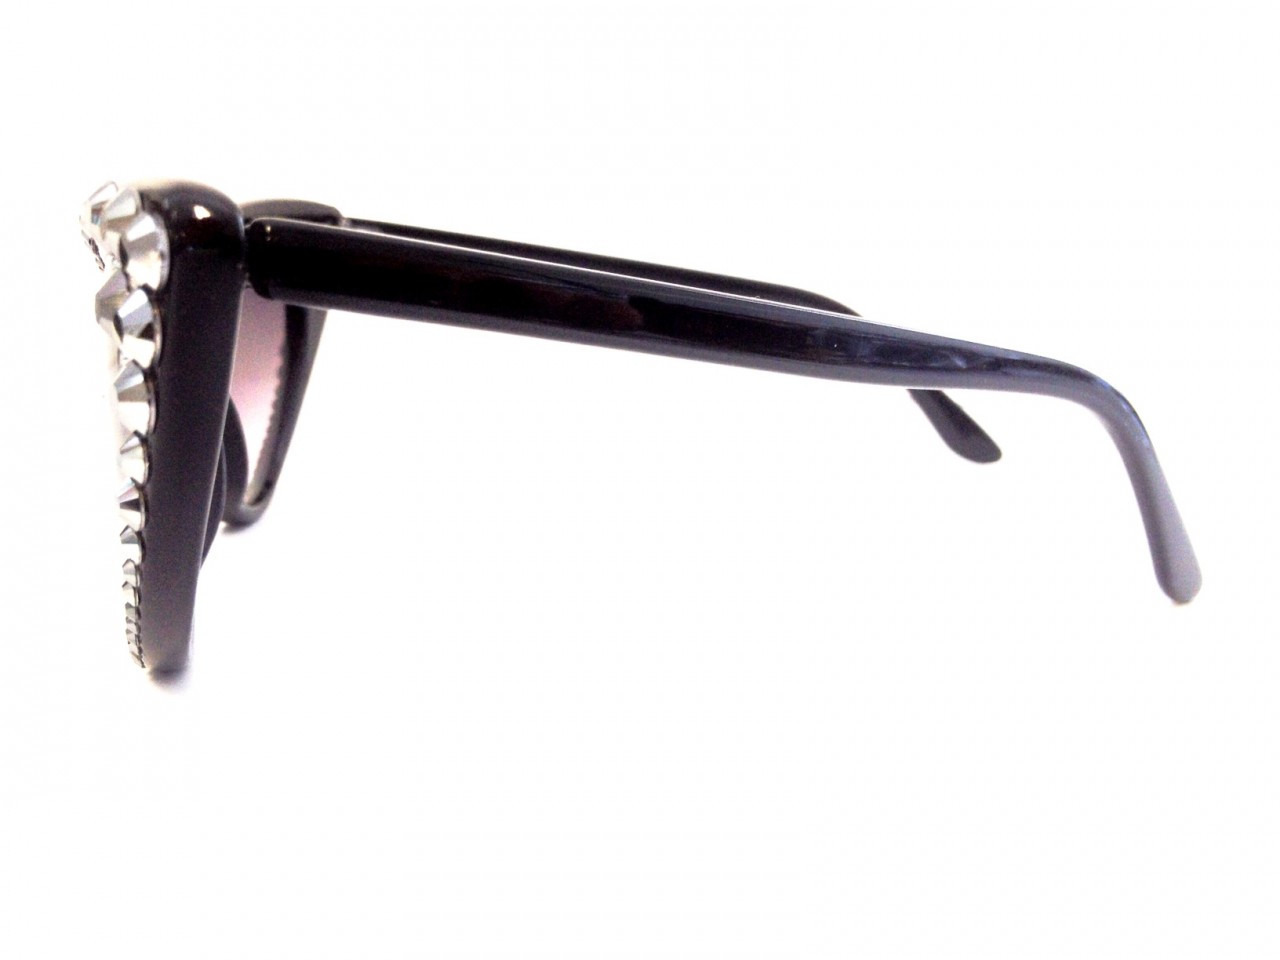 FLAME MIDNIGHT BLACK / black cat-eye sunglasses with gold details